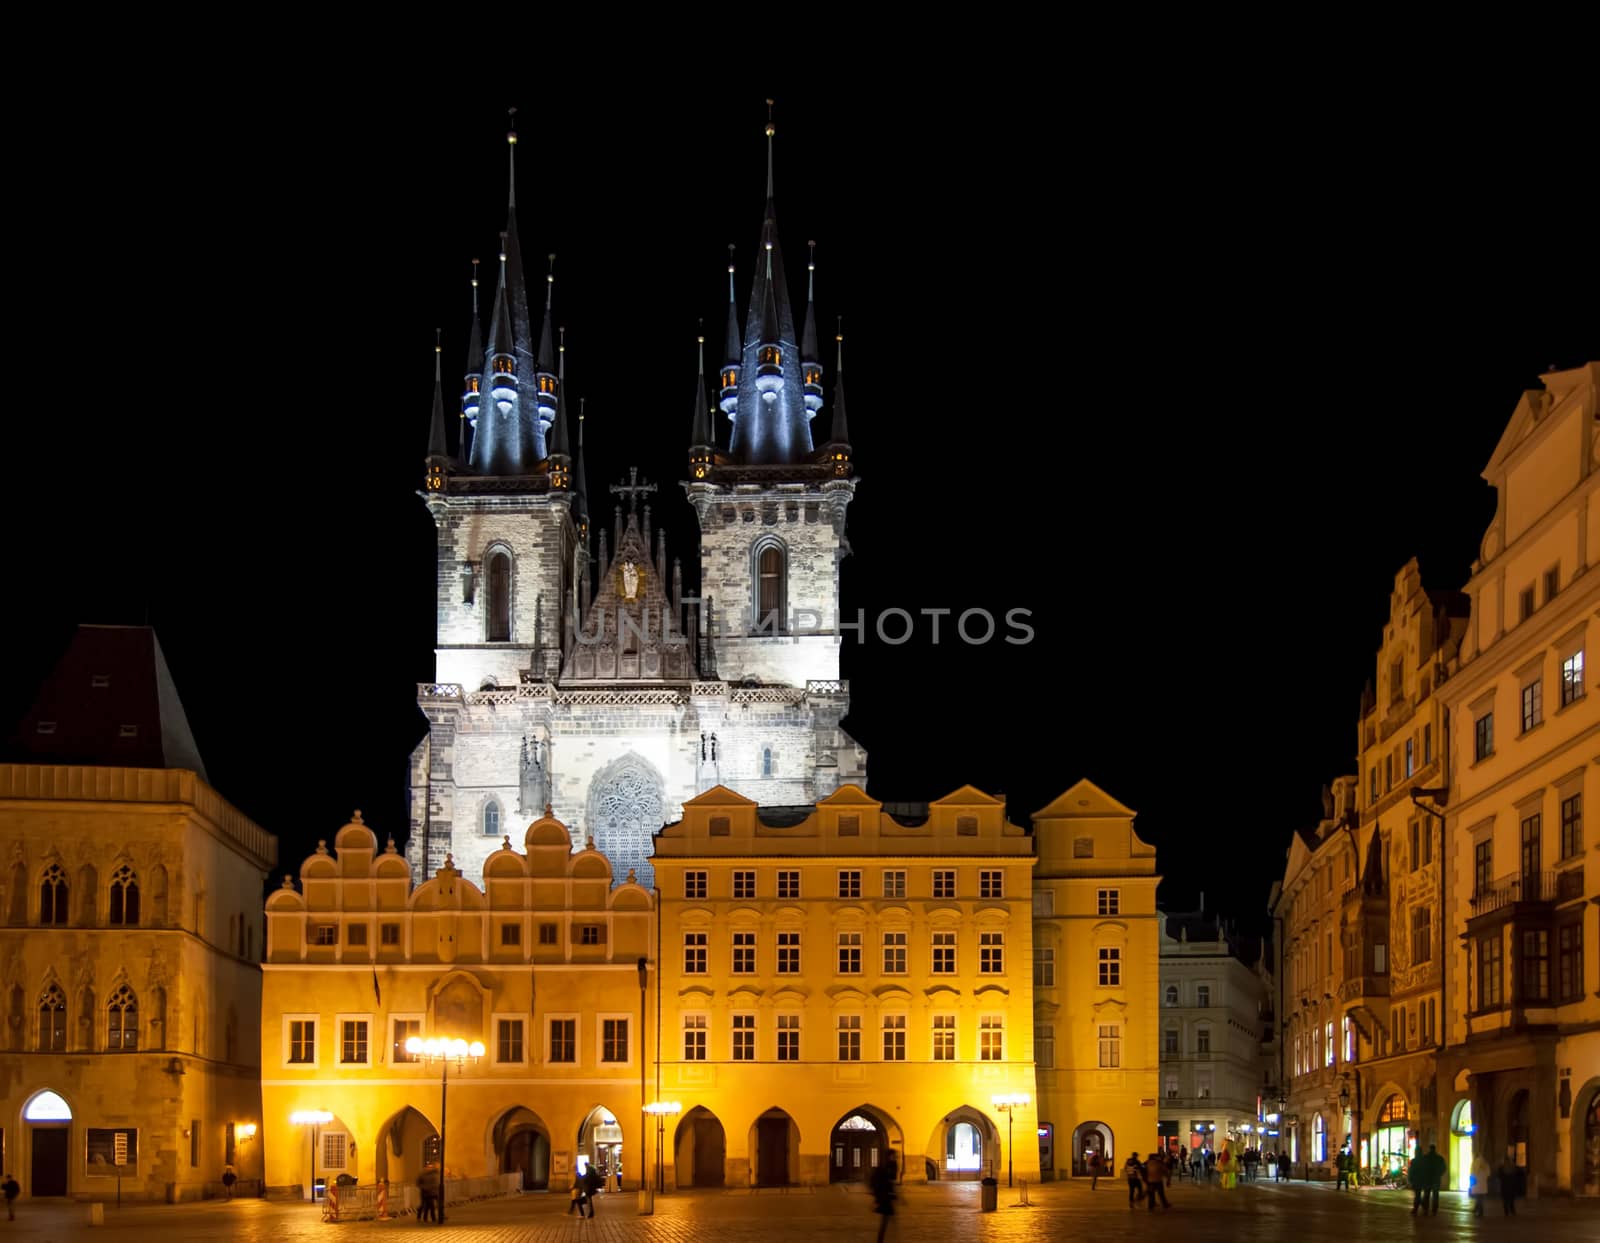 PRAGUE - February 13: Old Town Square with people, illuminated buildings and Tyn Church on background at evening. The square is very popular with tourists in Prague, Czech Republic on February 13, 2014.